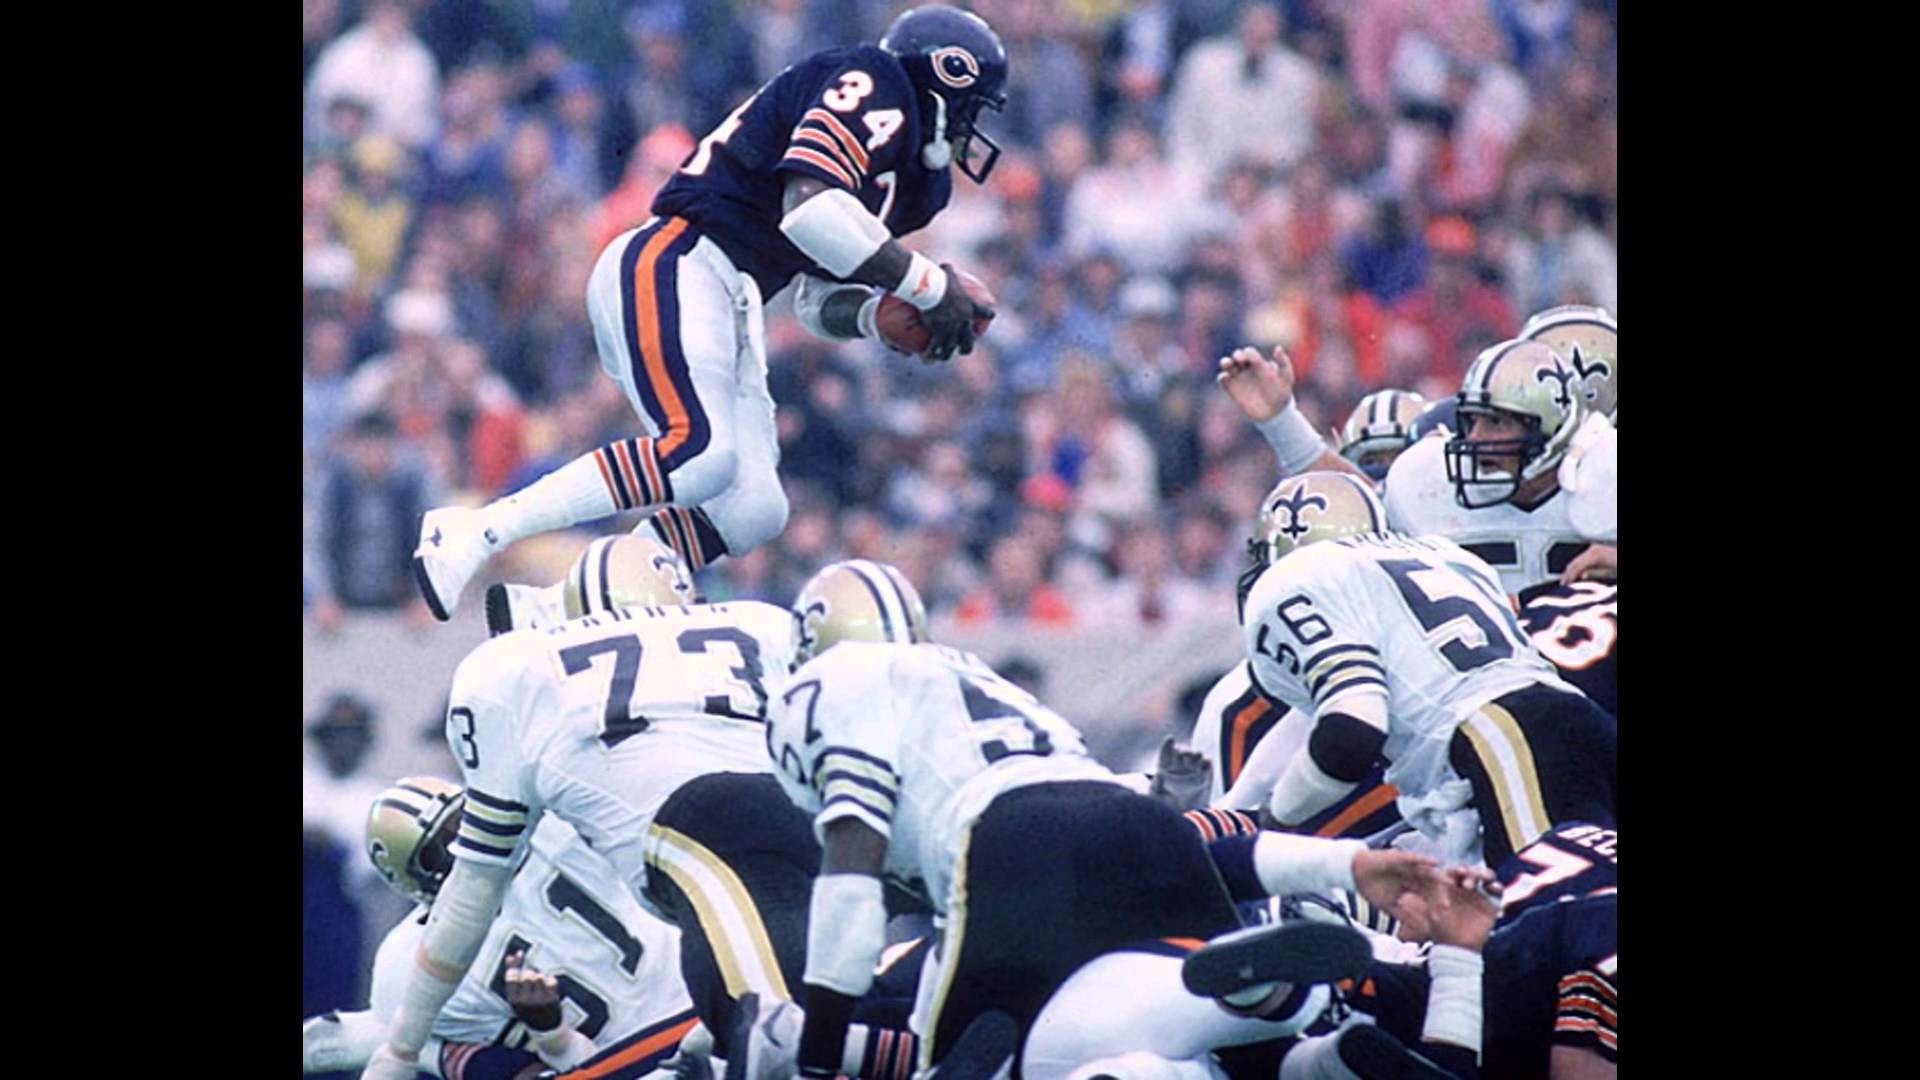 Res - 1920x1080, - Walter Payton Running , HD Wallpaper & Backgrounds